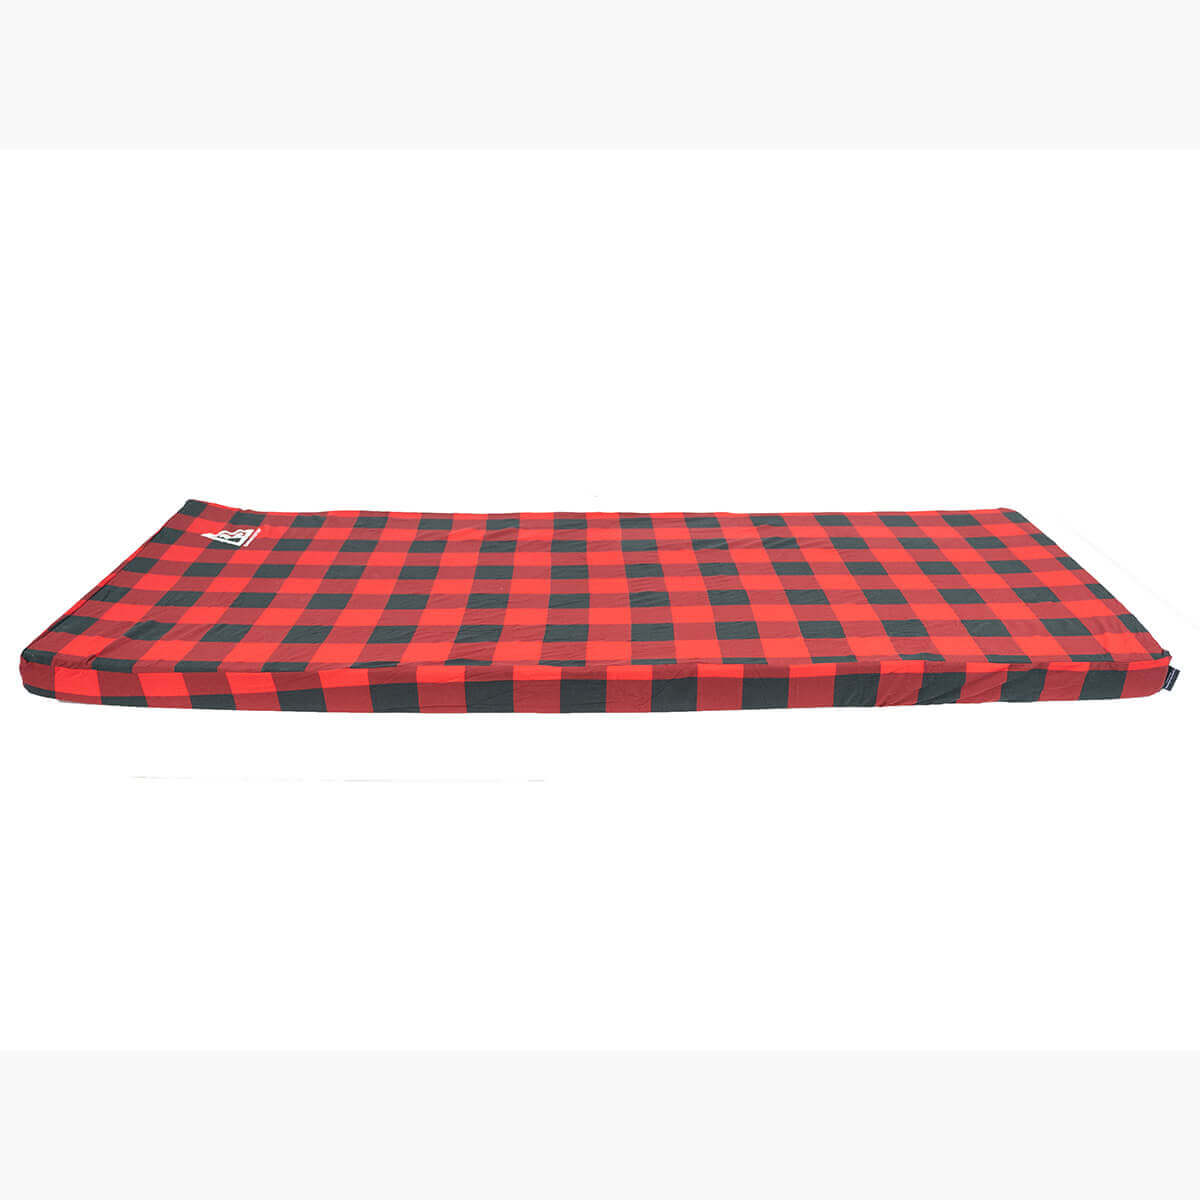 Canvas Cutter Buffalo Plaid Foam Cover in  by GOHUNT | Canvas Cutter - GOHUNT Shop